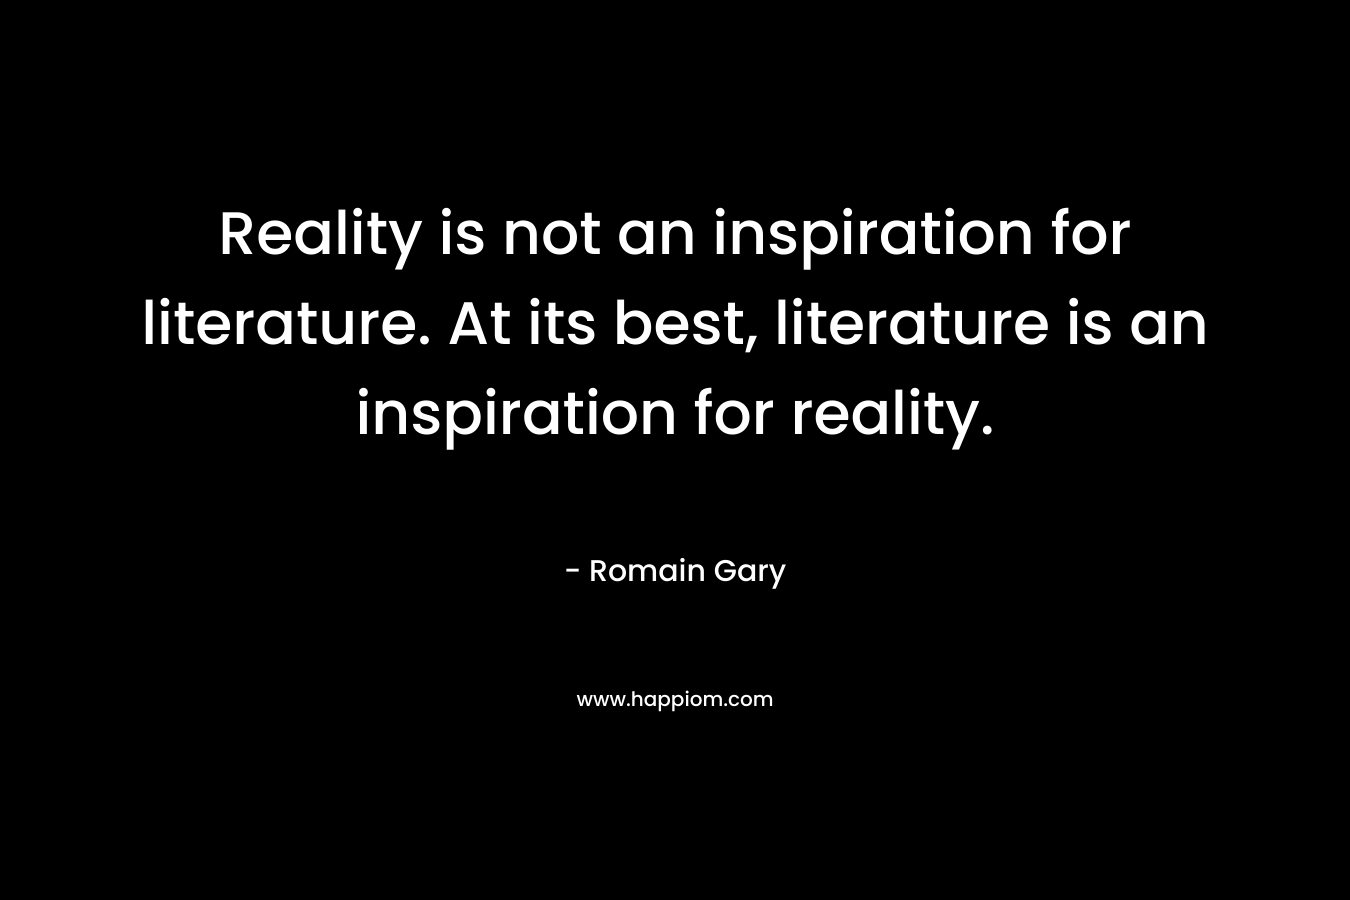 Reality is not an inspiration for literature. At its best, literature is an inspiration for reality.